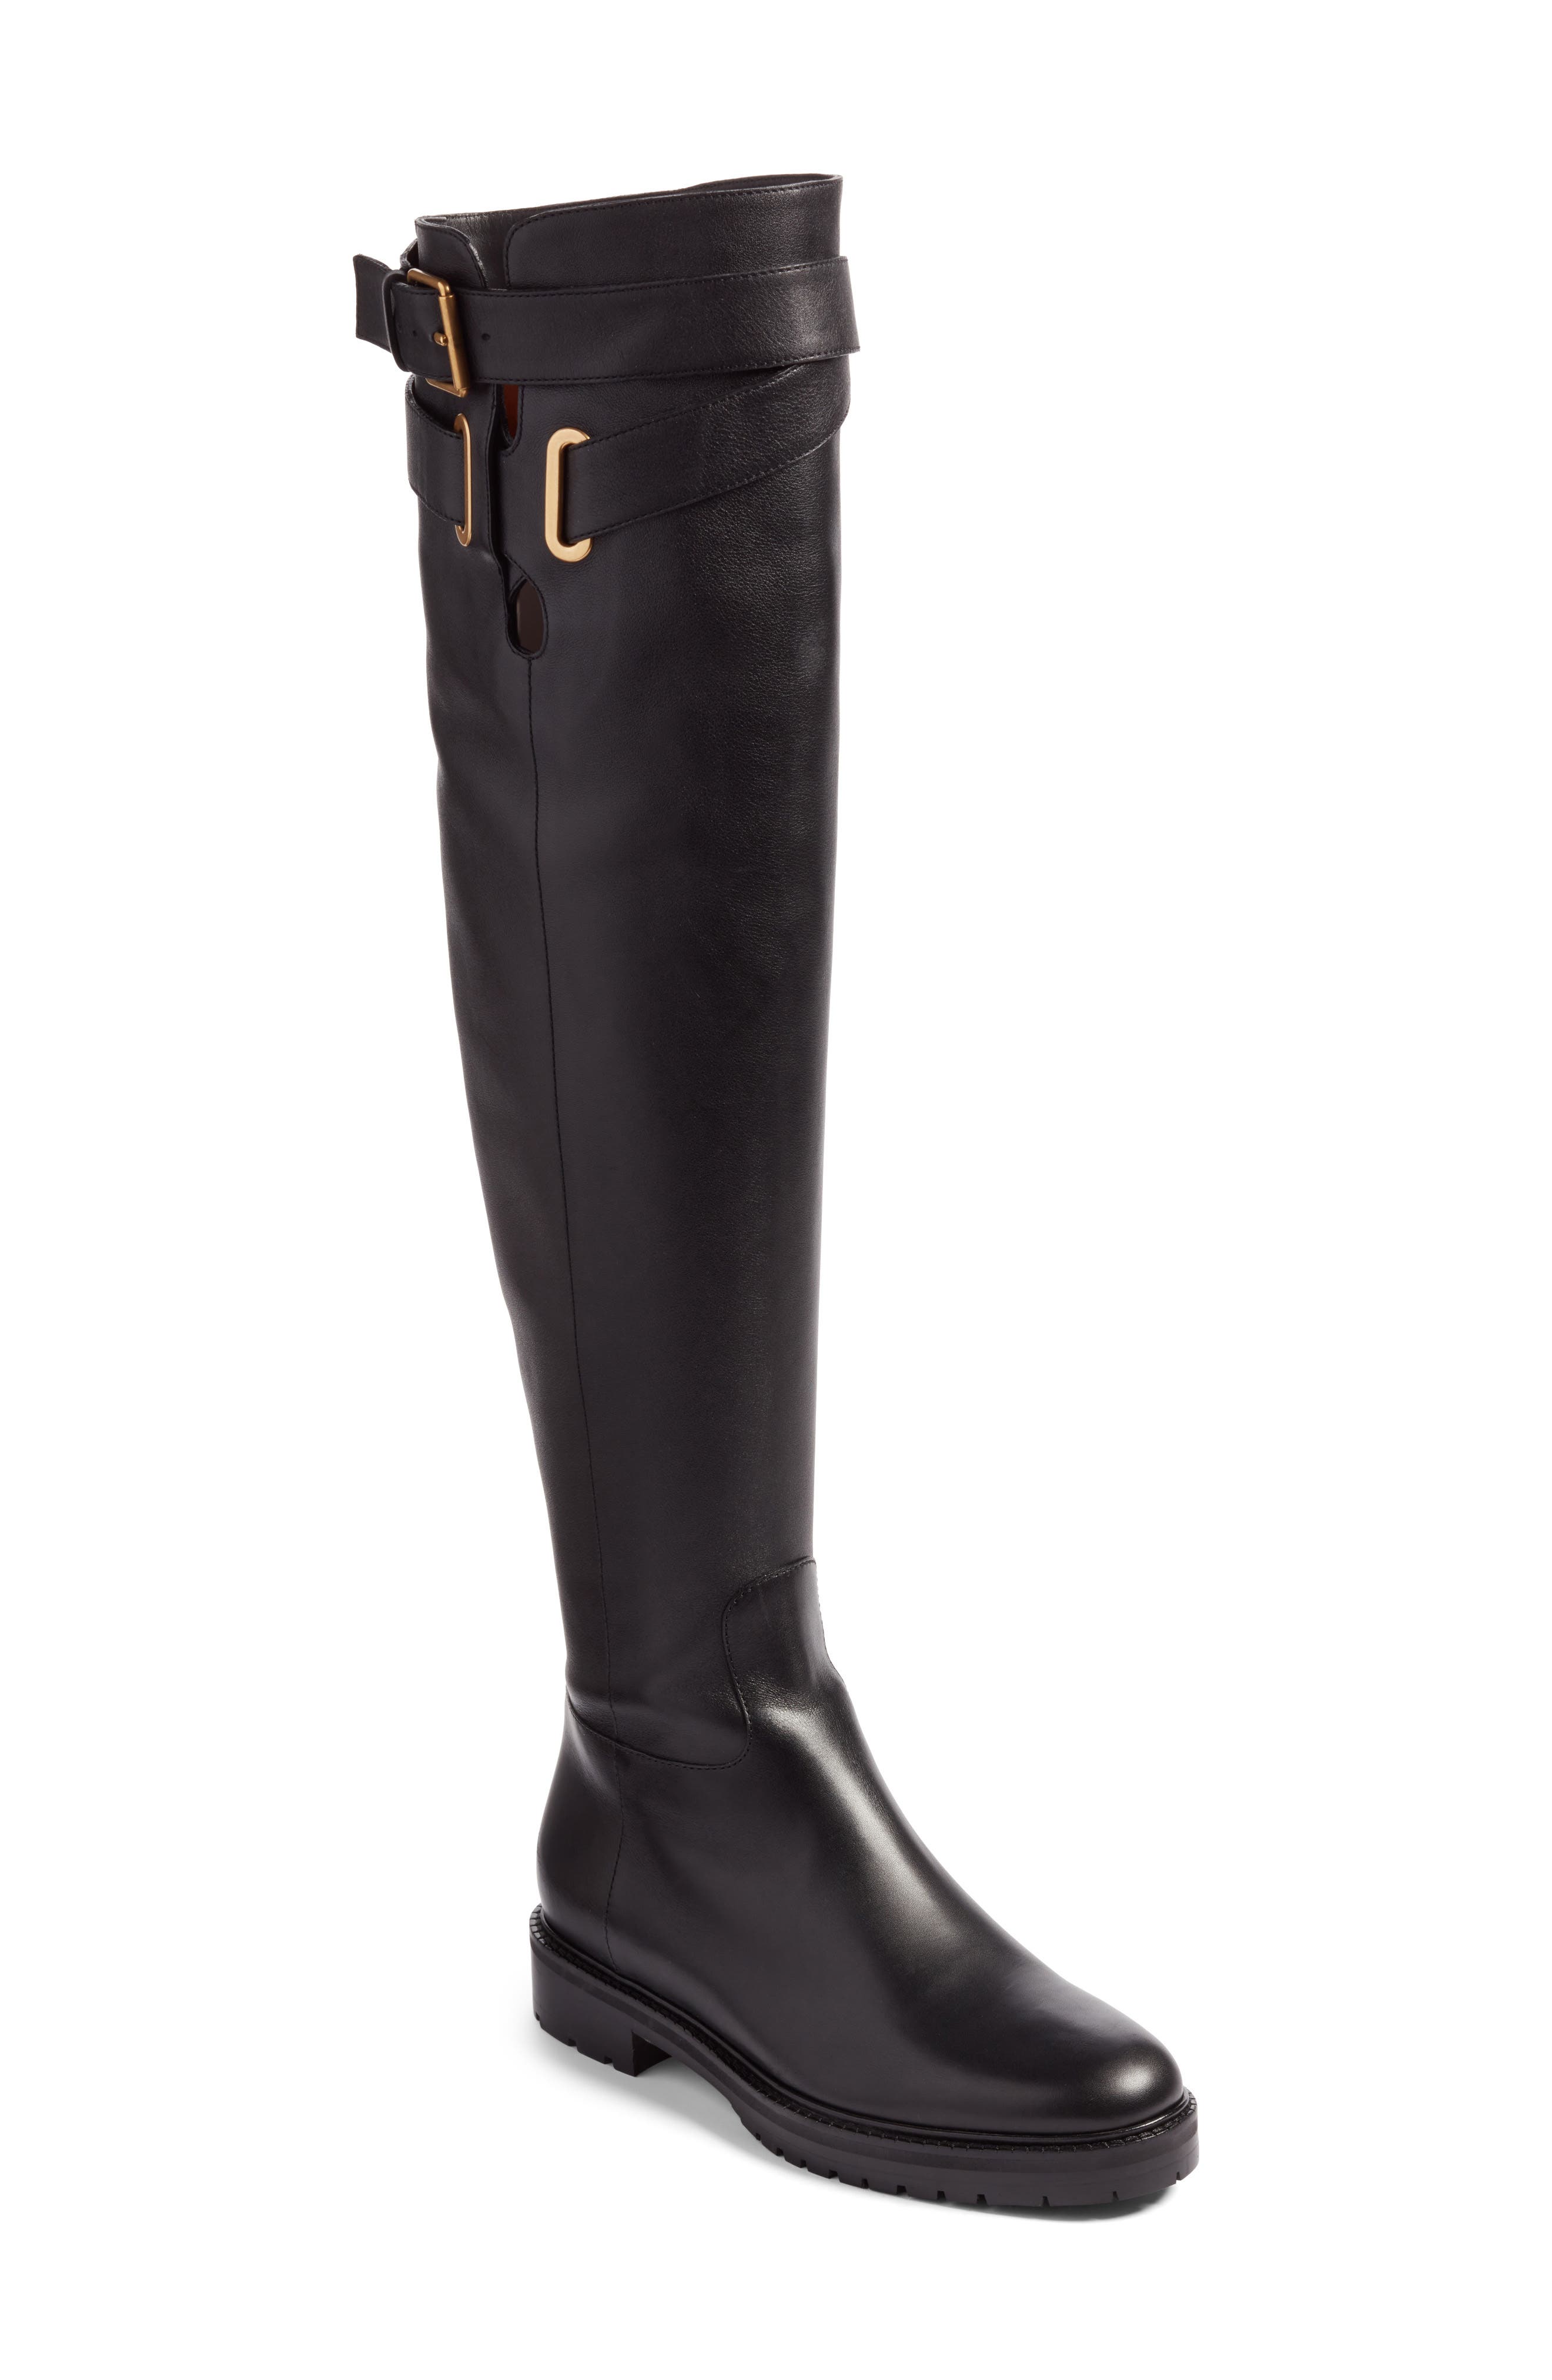 black over the knee thigh high boots